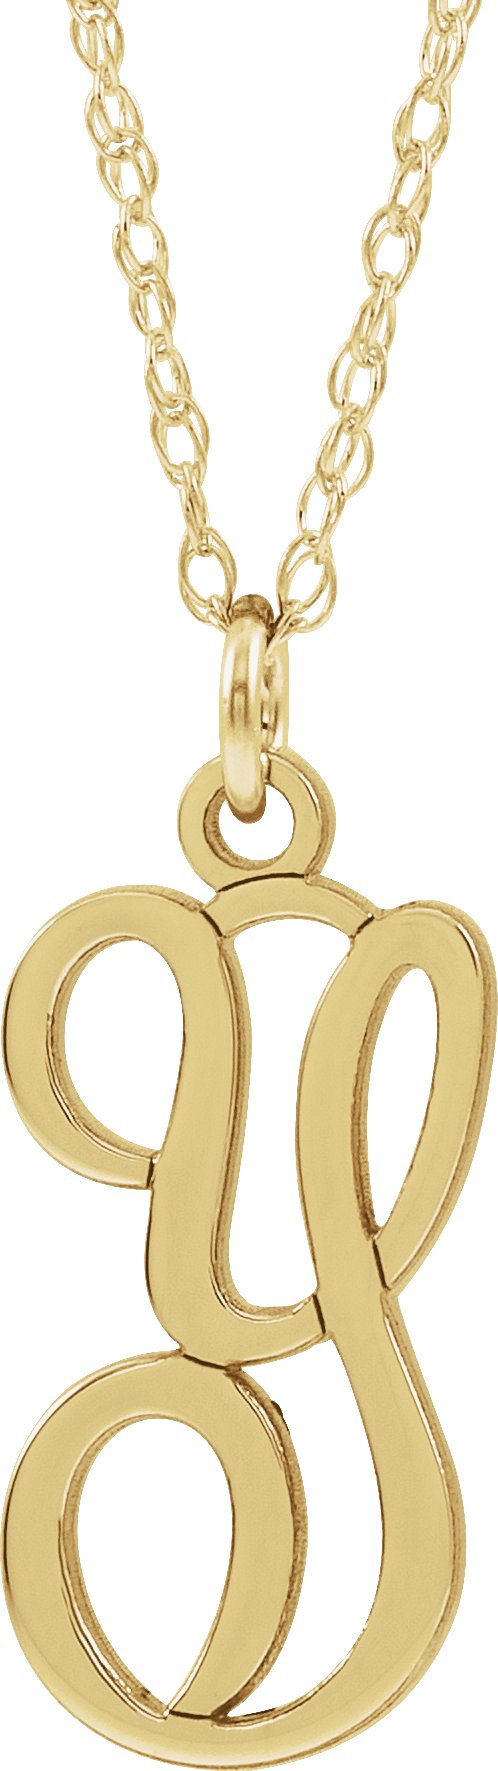 14K Yellow Gold-Plated Sterling Silver Script Initial Y 16-18" Necklace